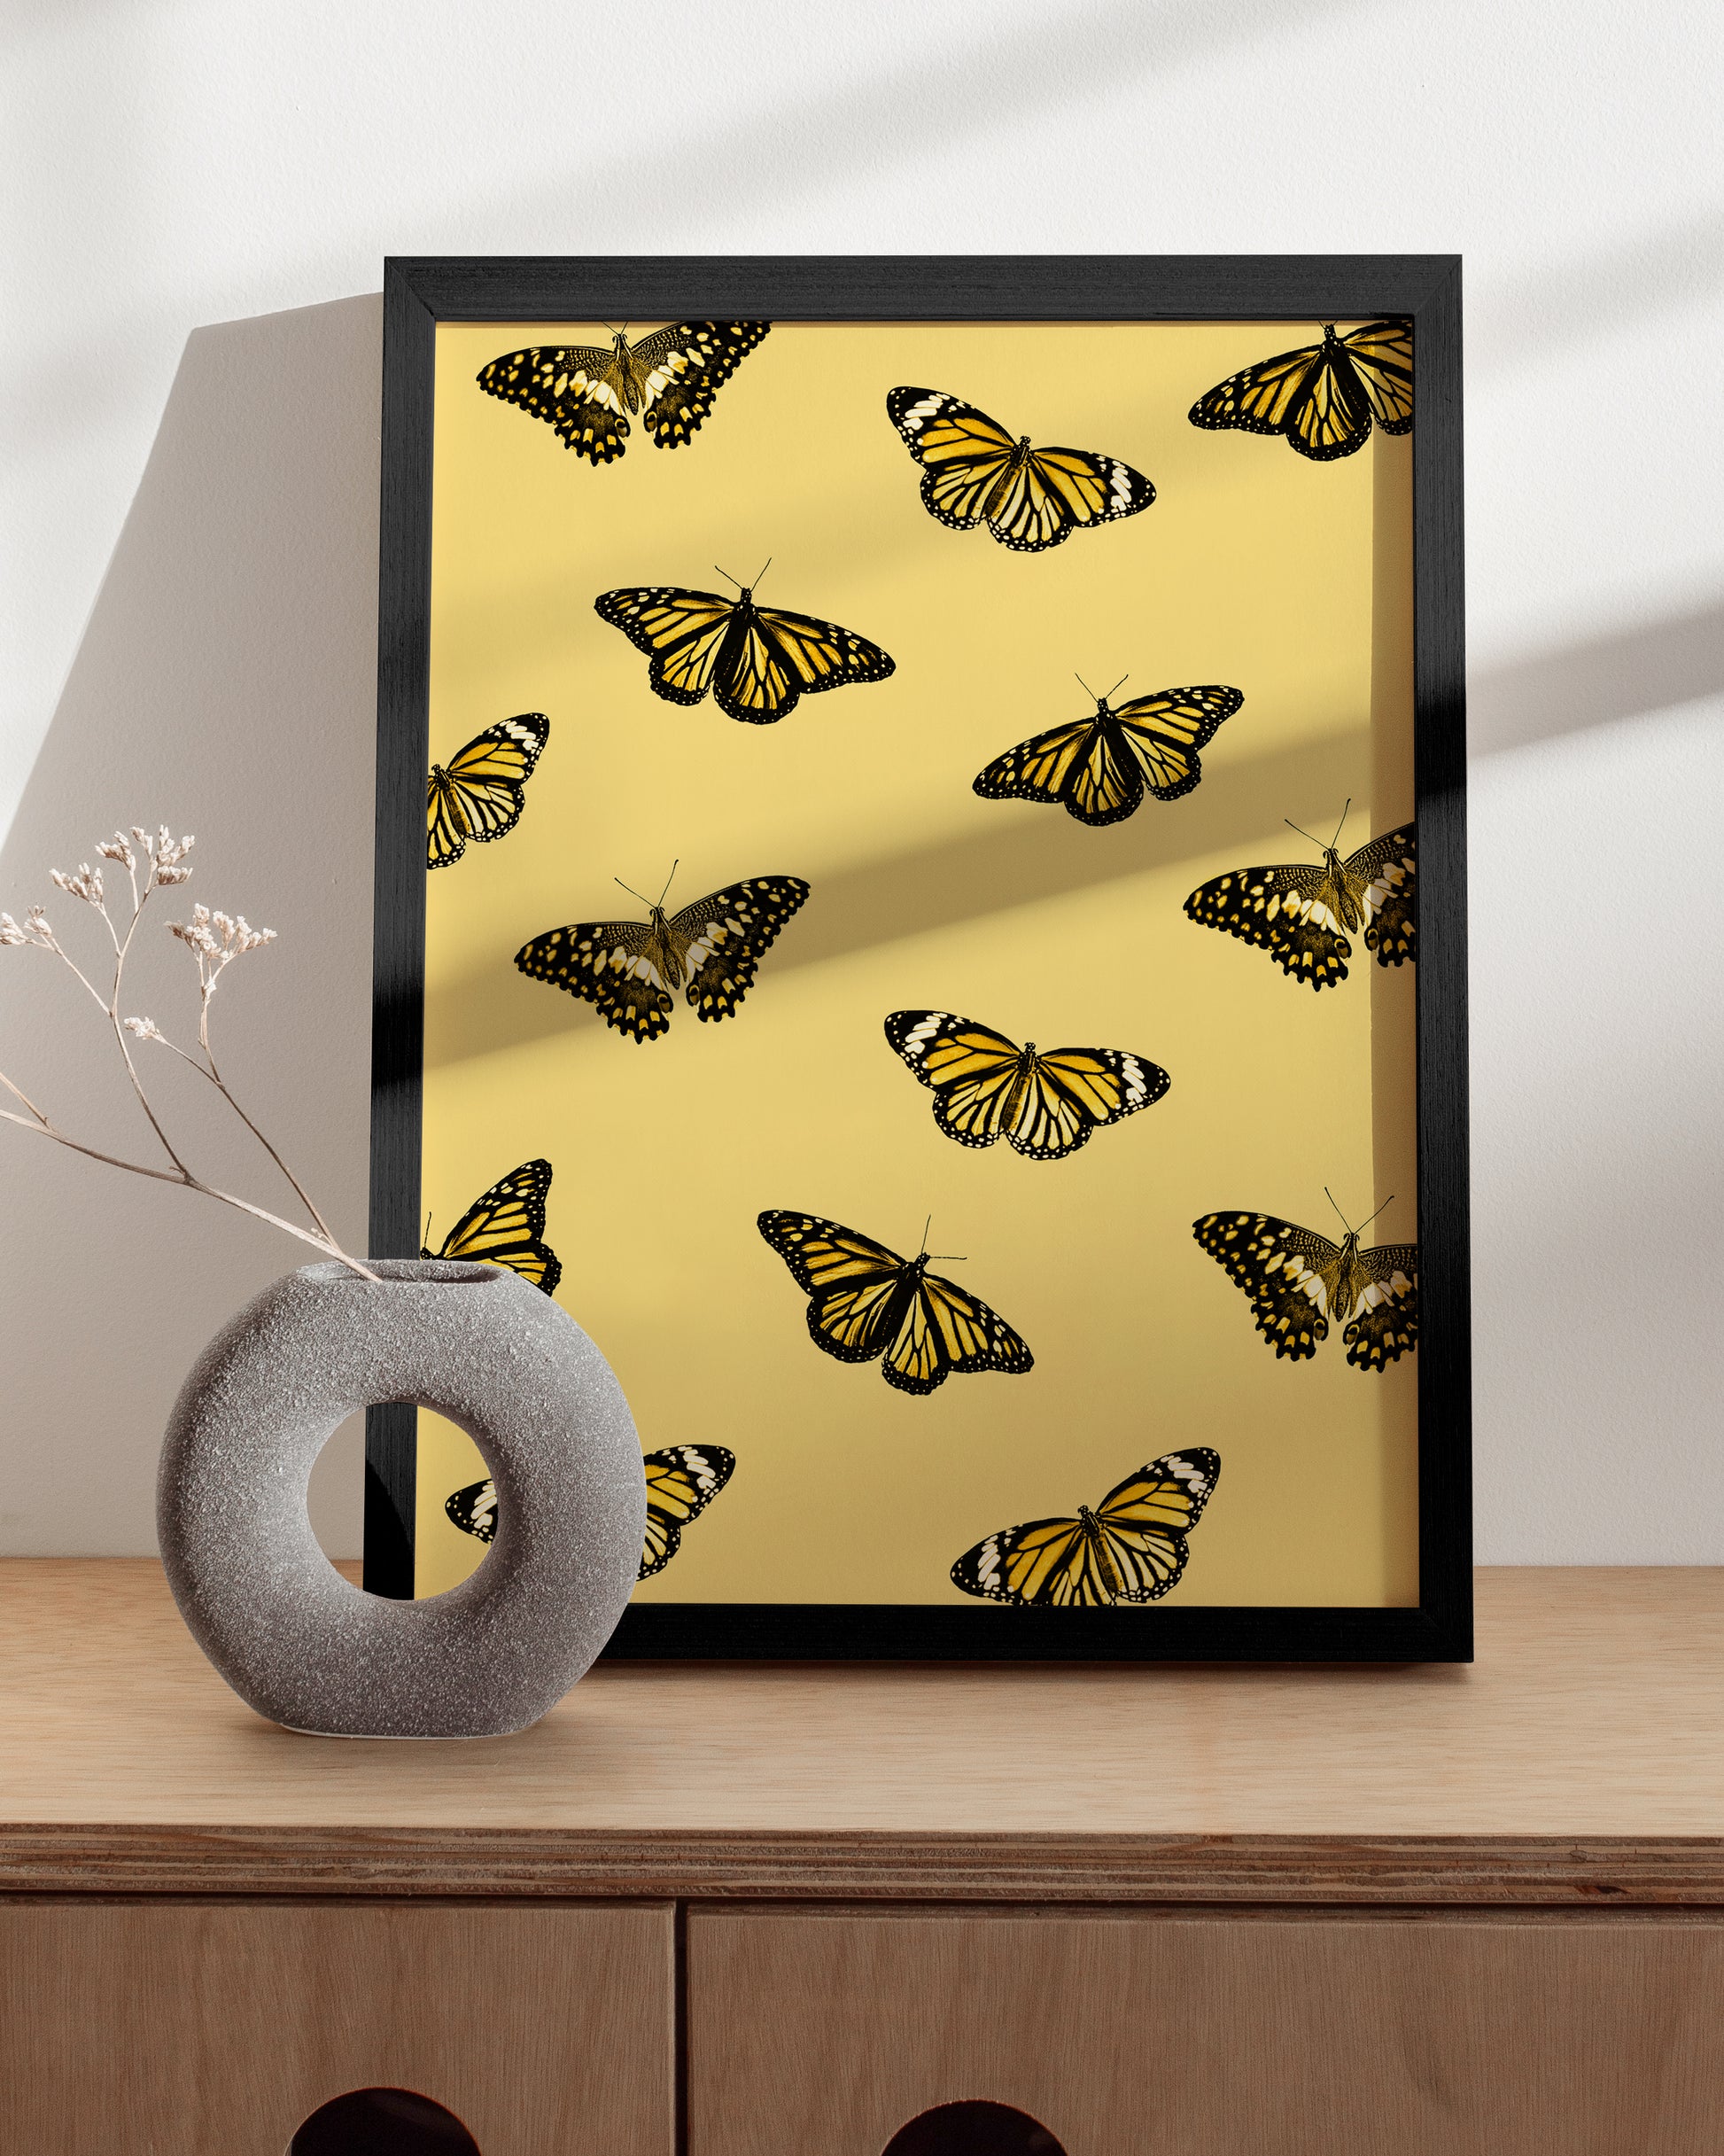 Honey Bee Decor Cavallini Poster By Haus and Hues - Bee Wall Decor, (12x16)